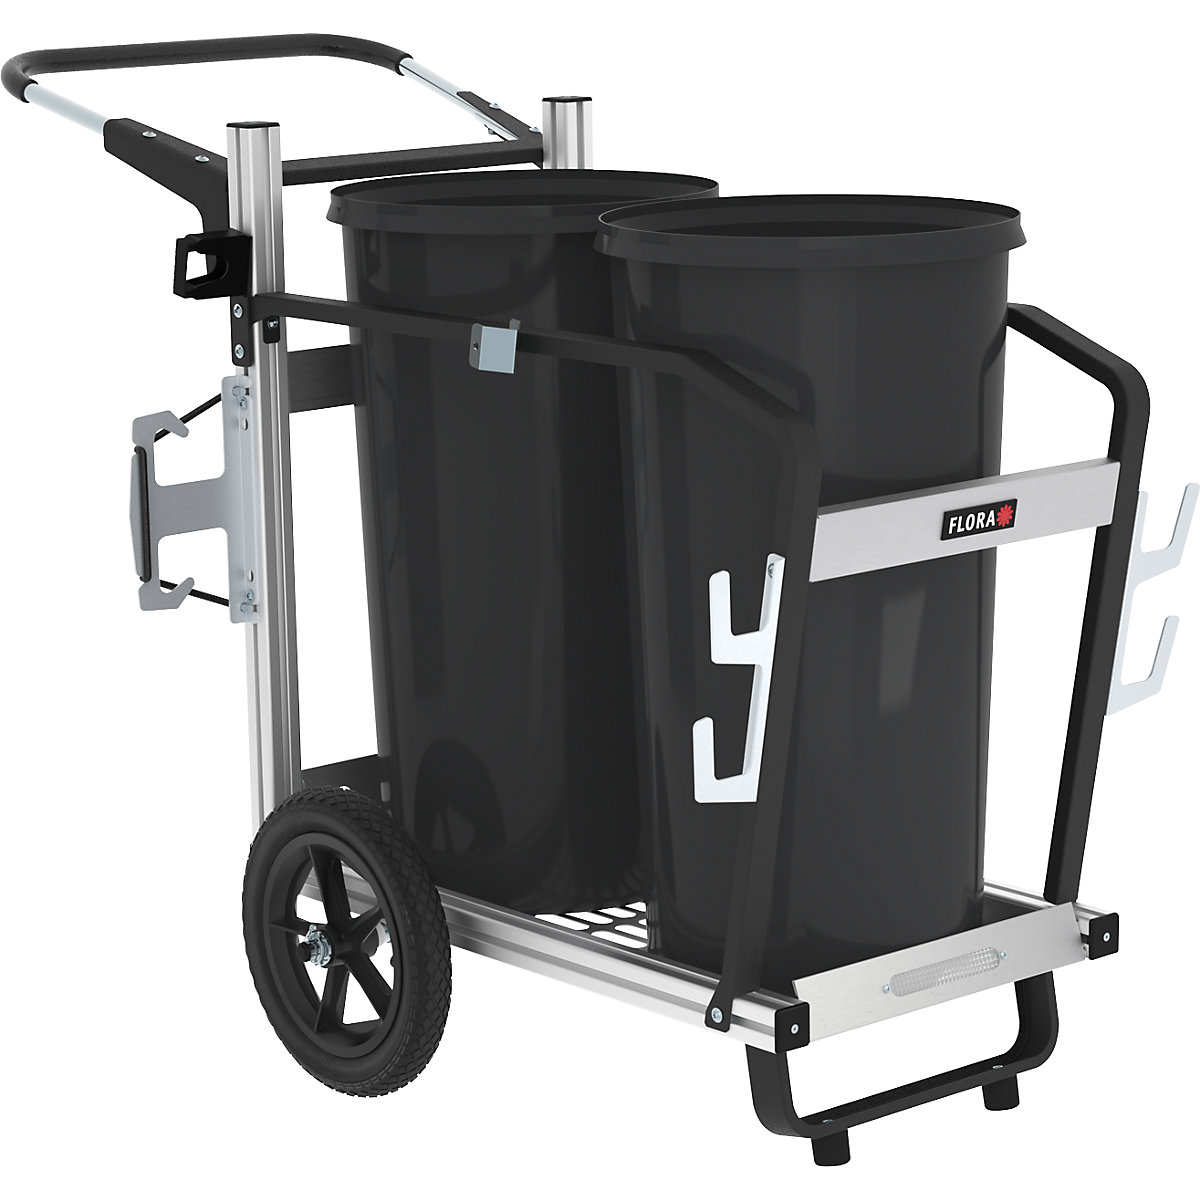 Easy Duo waste collection trolley - FLORA